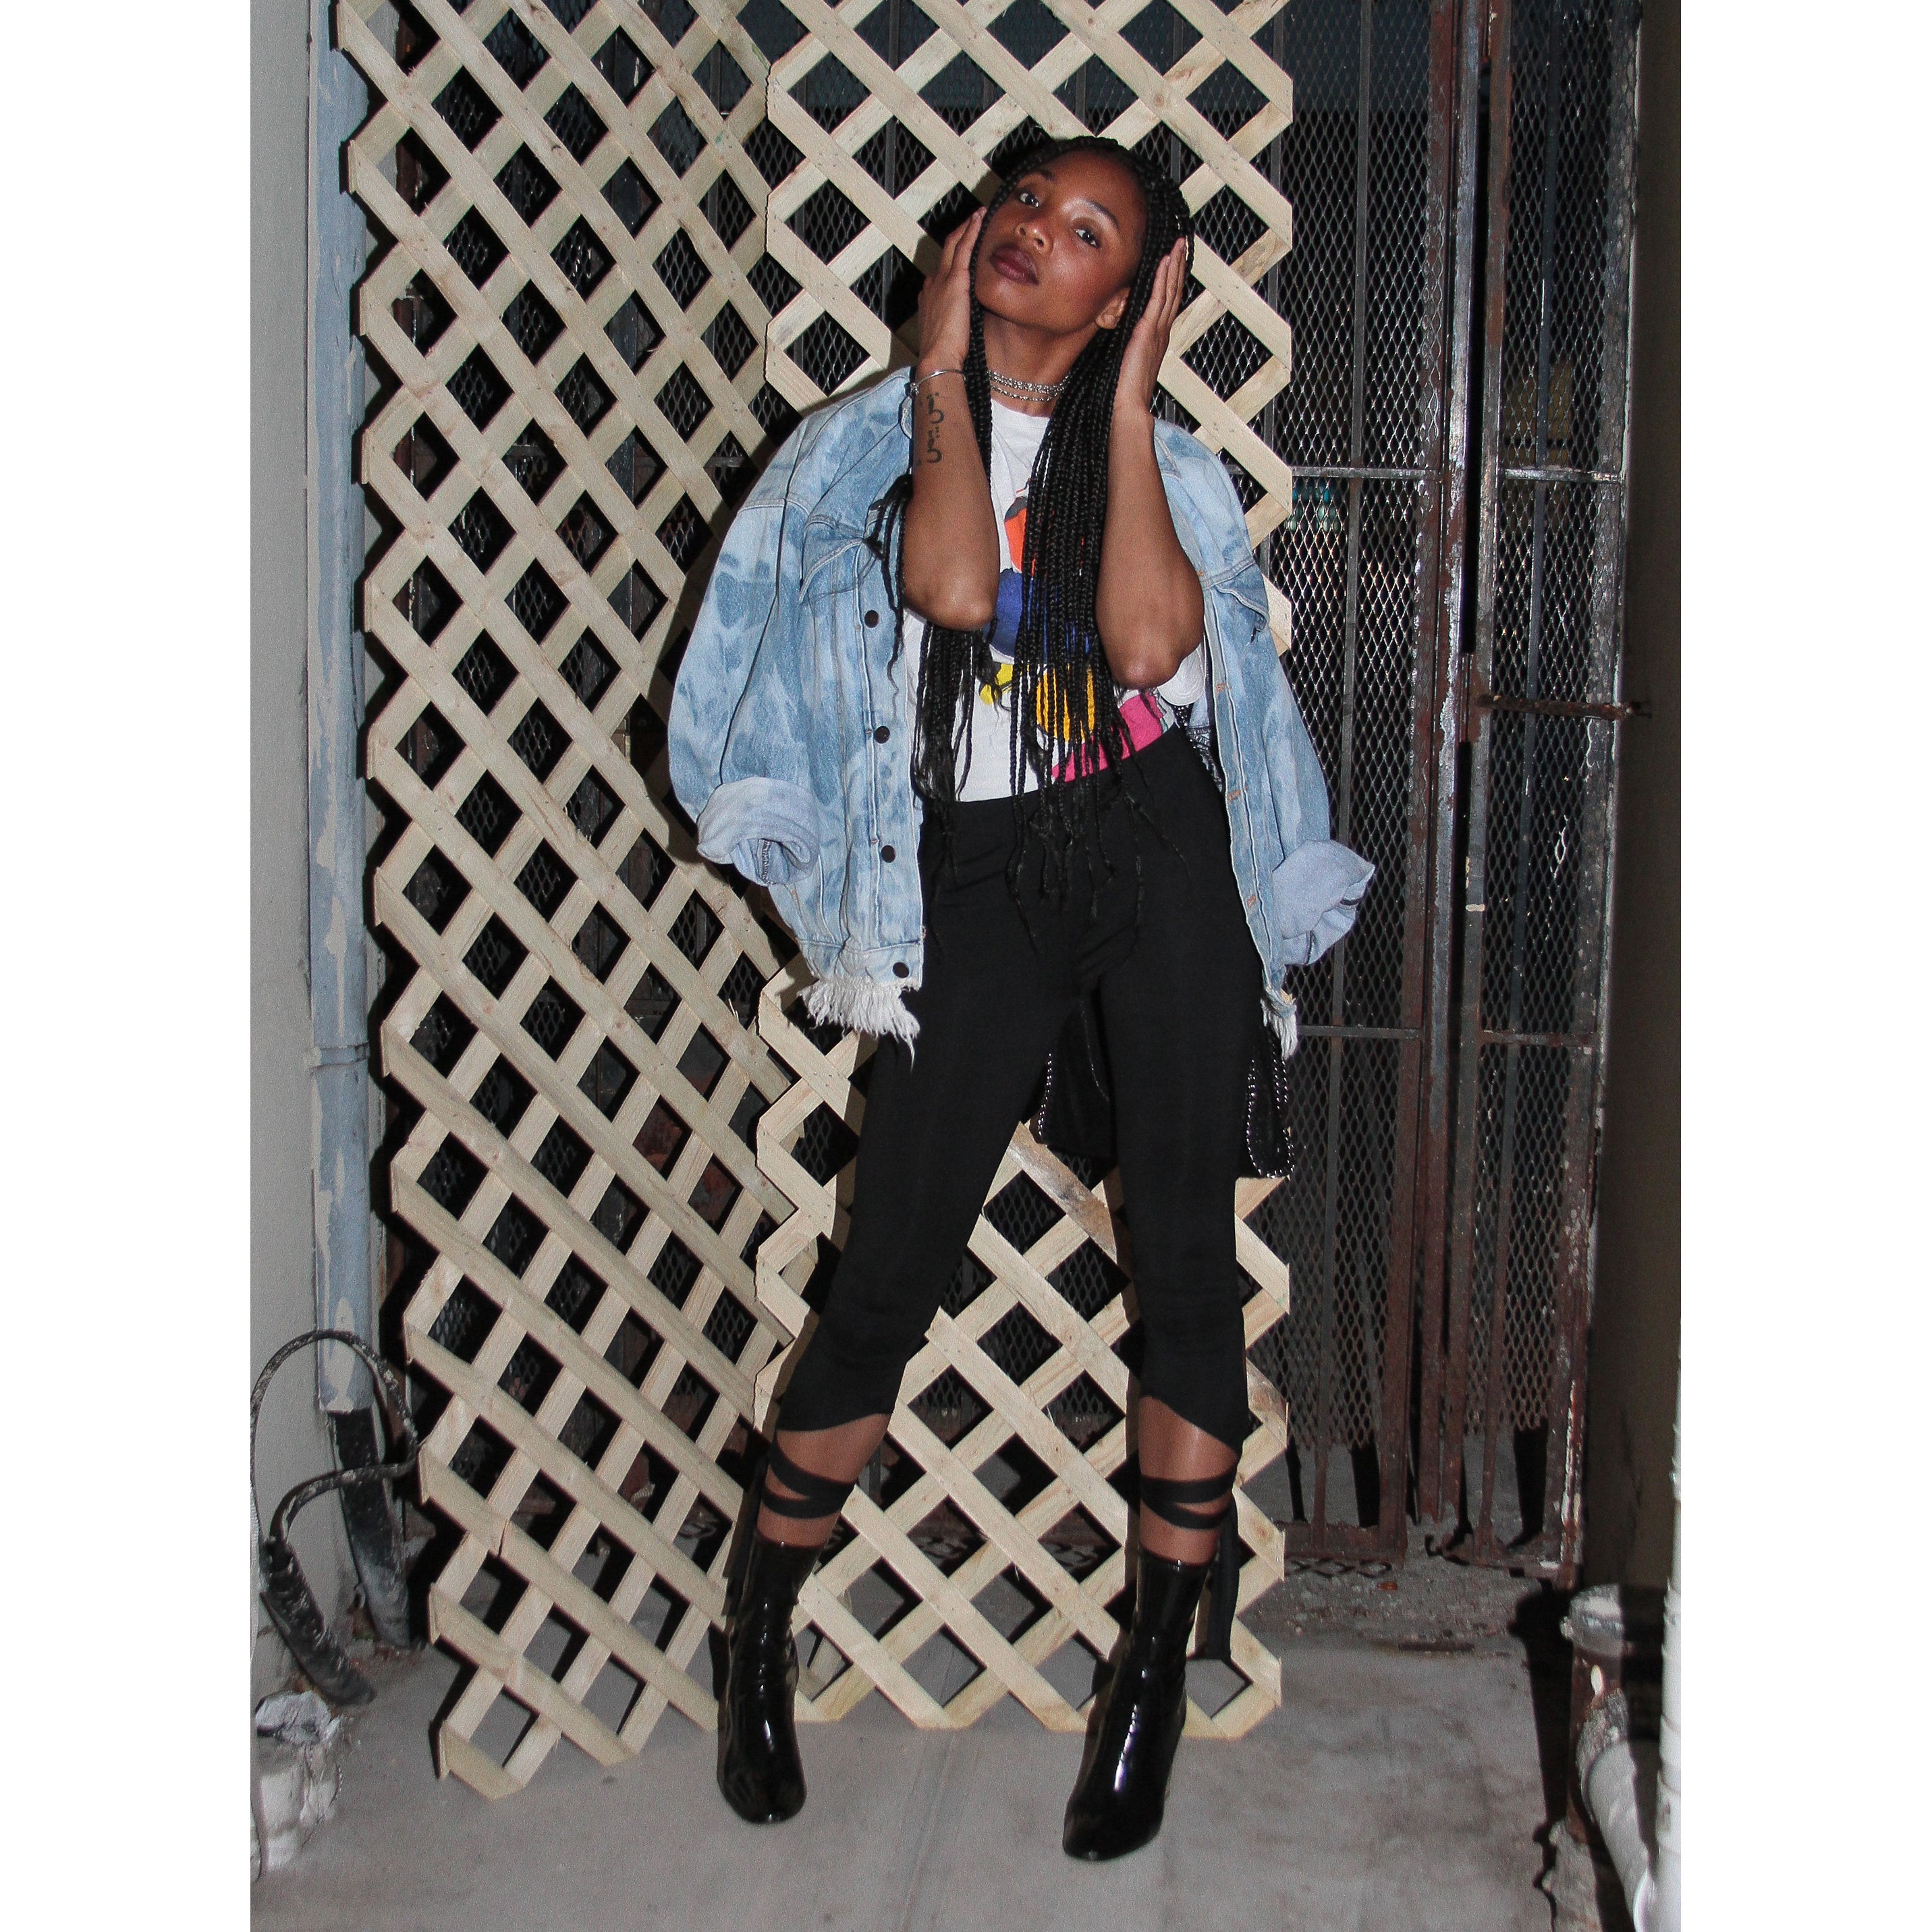 The Saint Heron House New York Event Was Cool-Girl Central | Essence